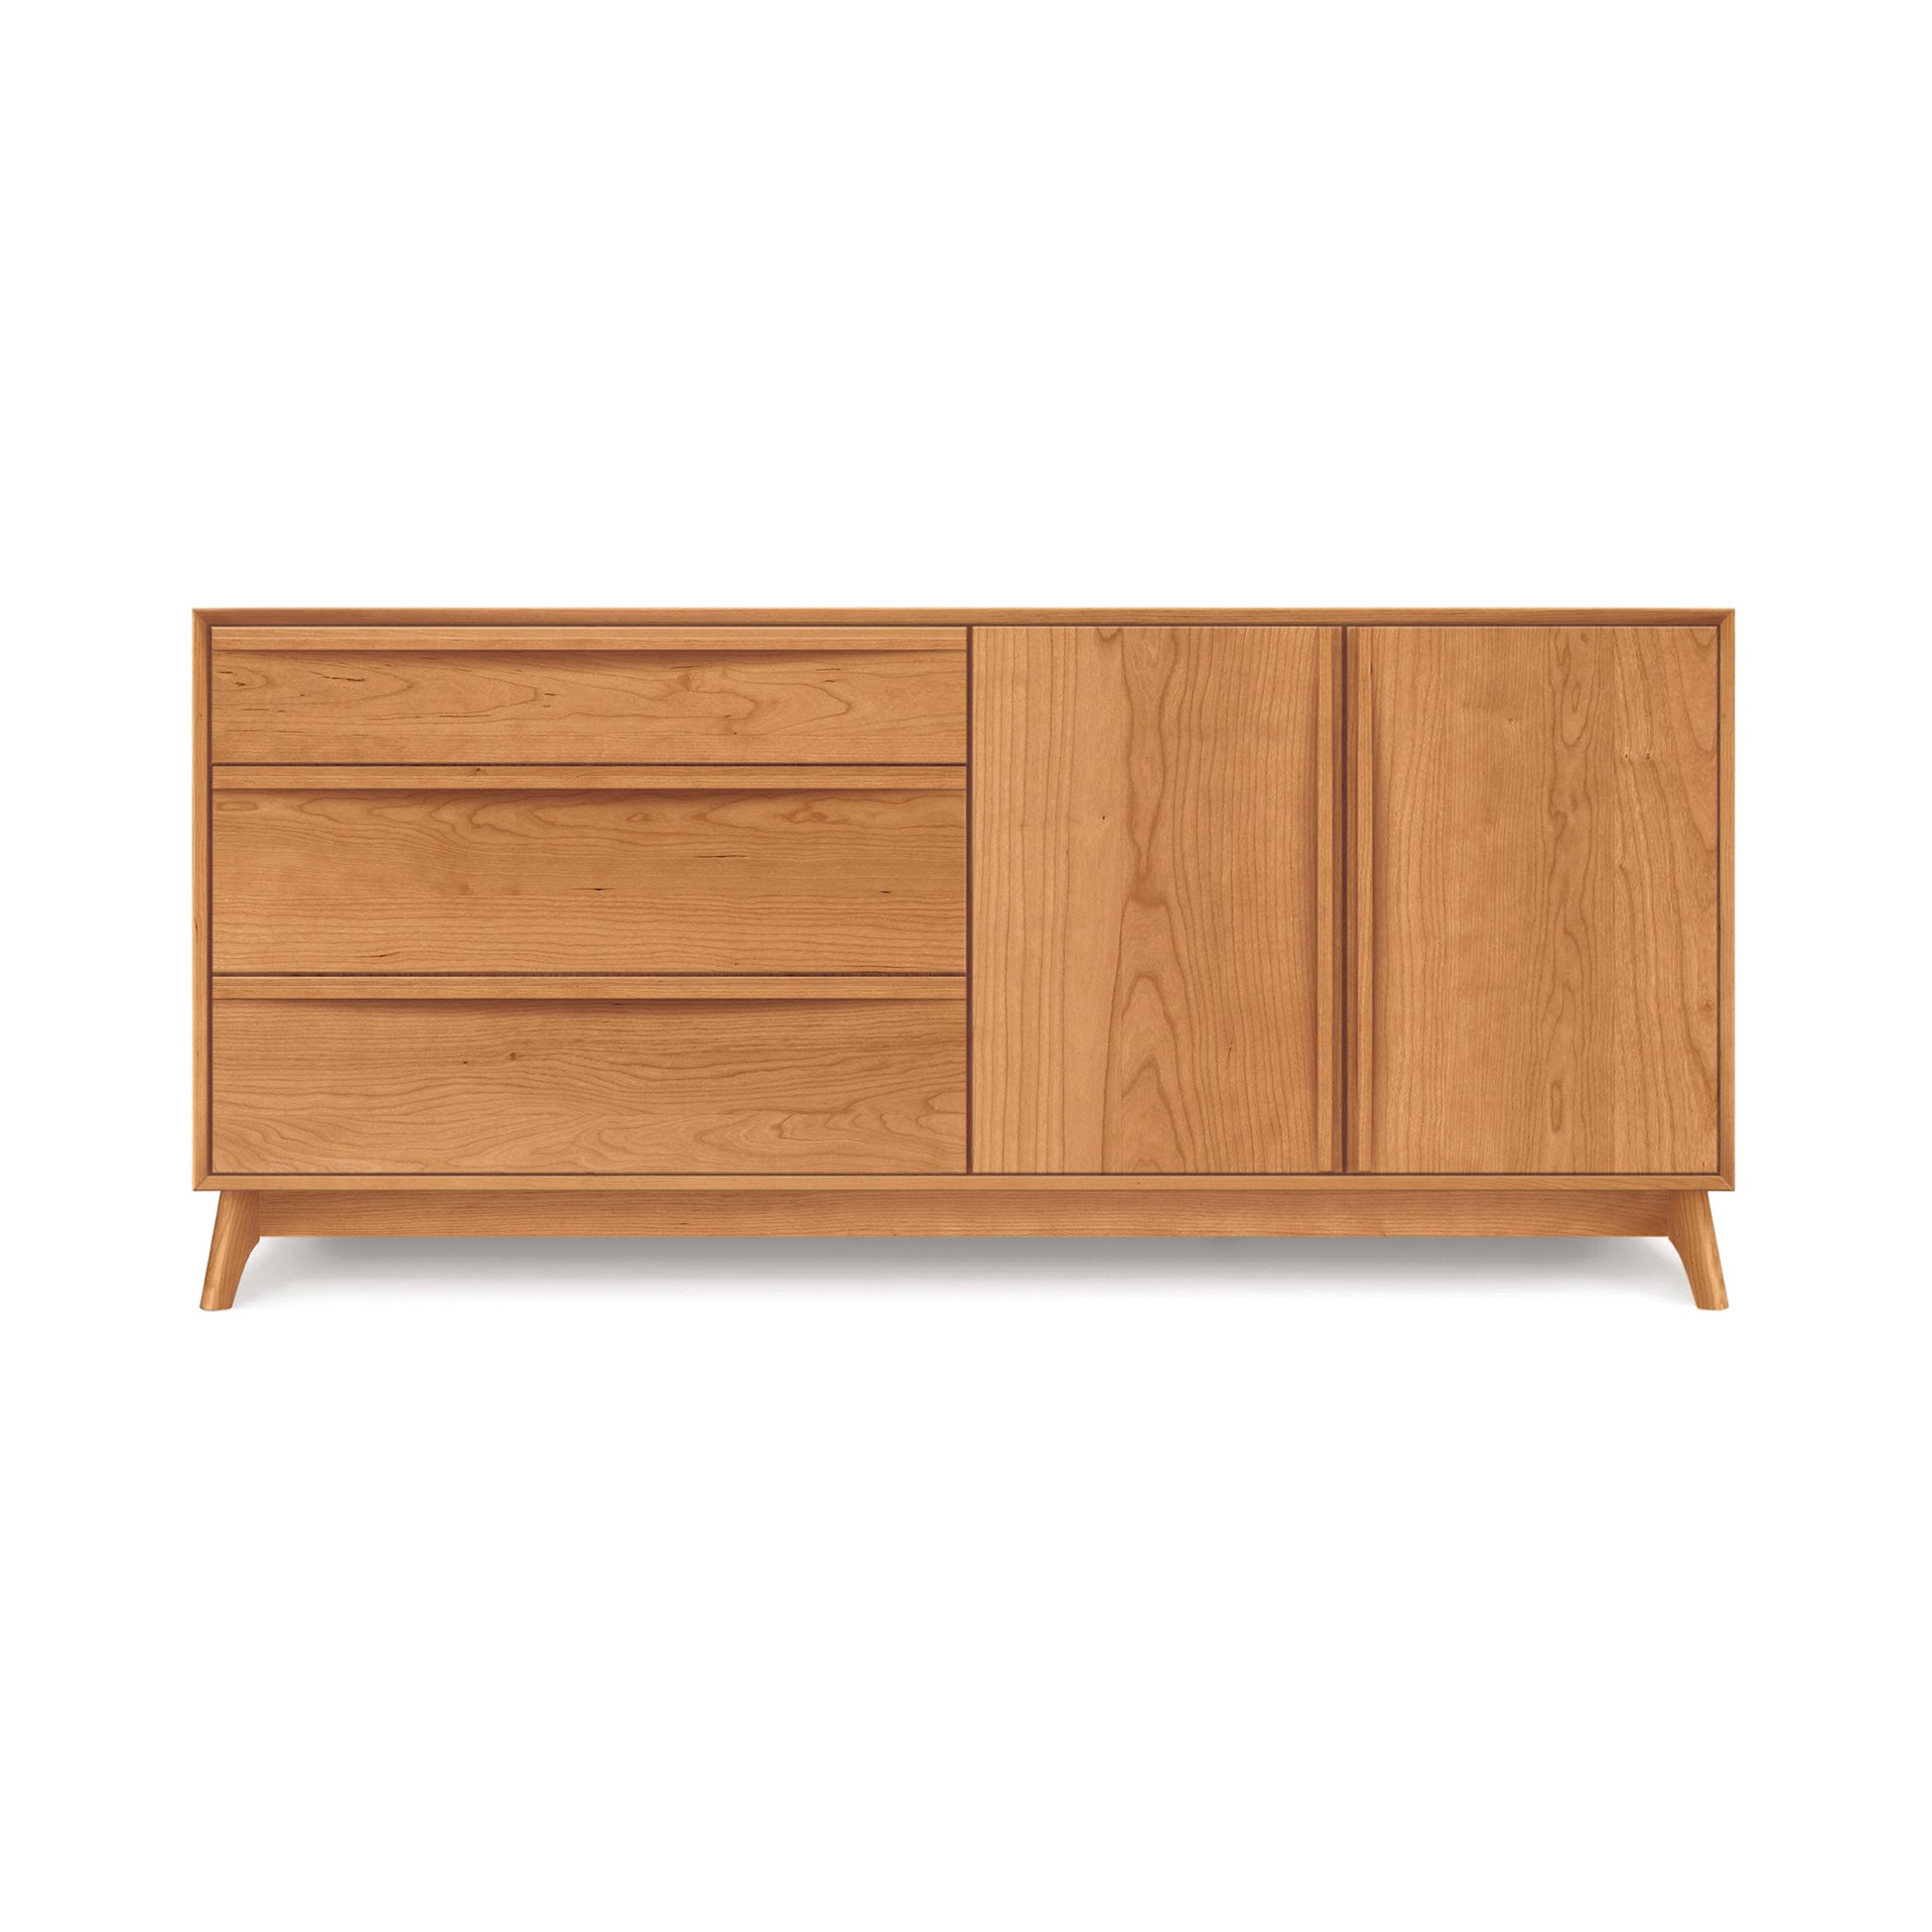 A modern Catalina 3-Drawers, 2-Door Buffet from Copeland Furniture, resting on angled legs, against a white background.